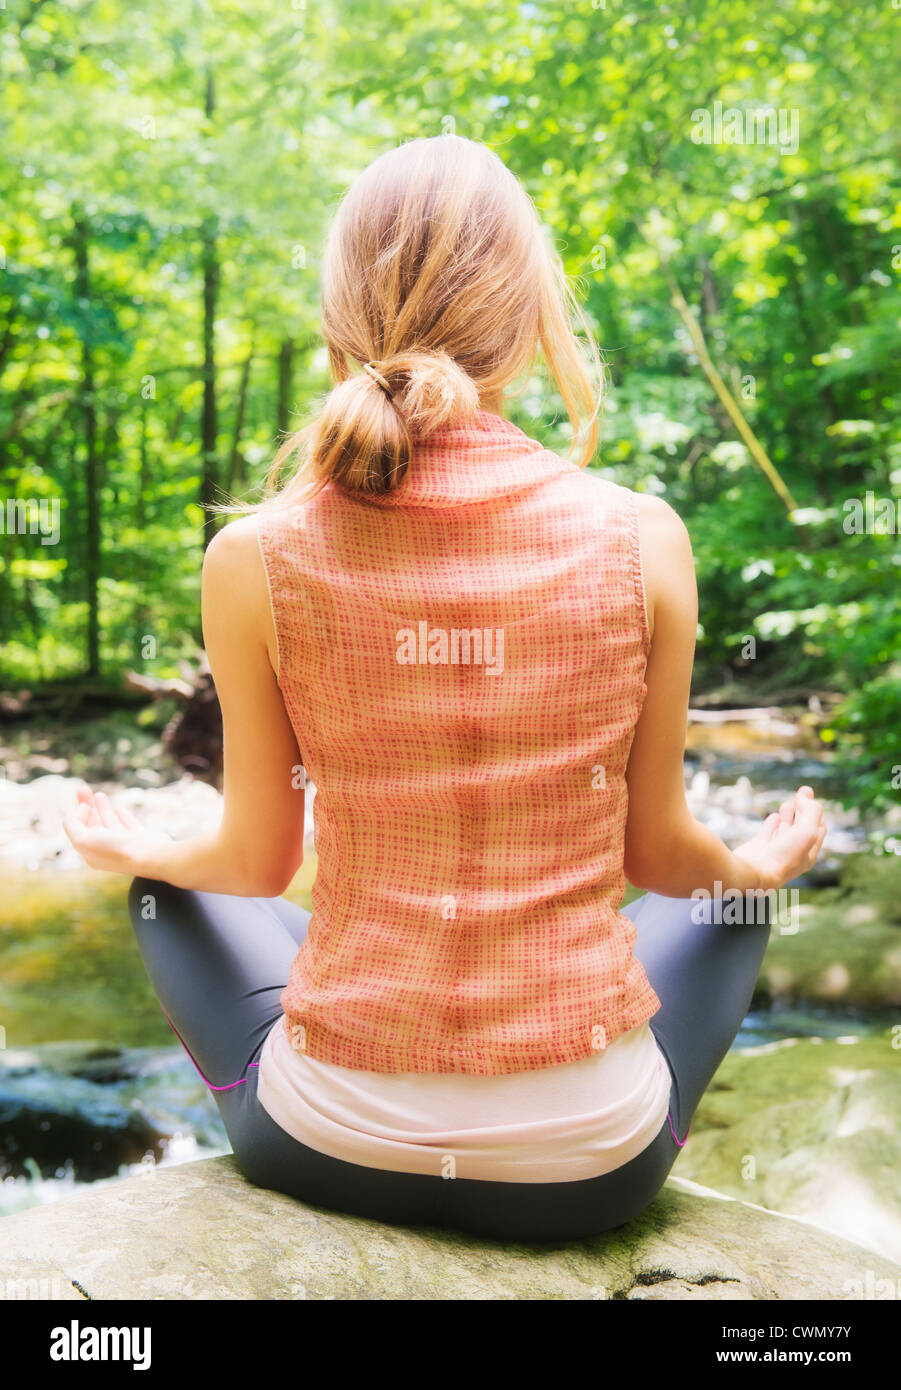 USA, New Jersey, Mendham, Woman practicing joga in forest Stock Photo